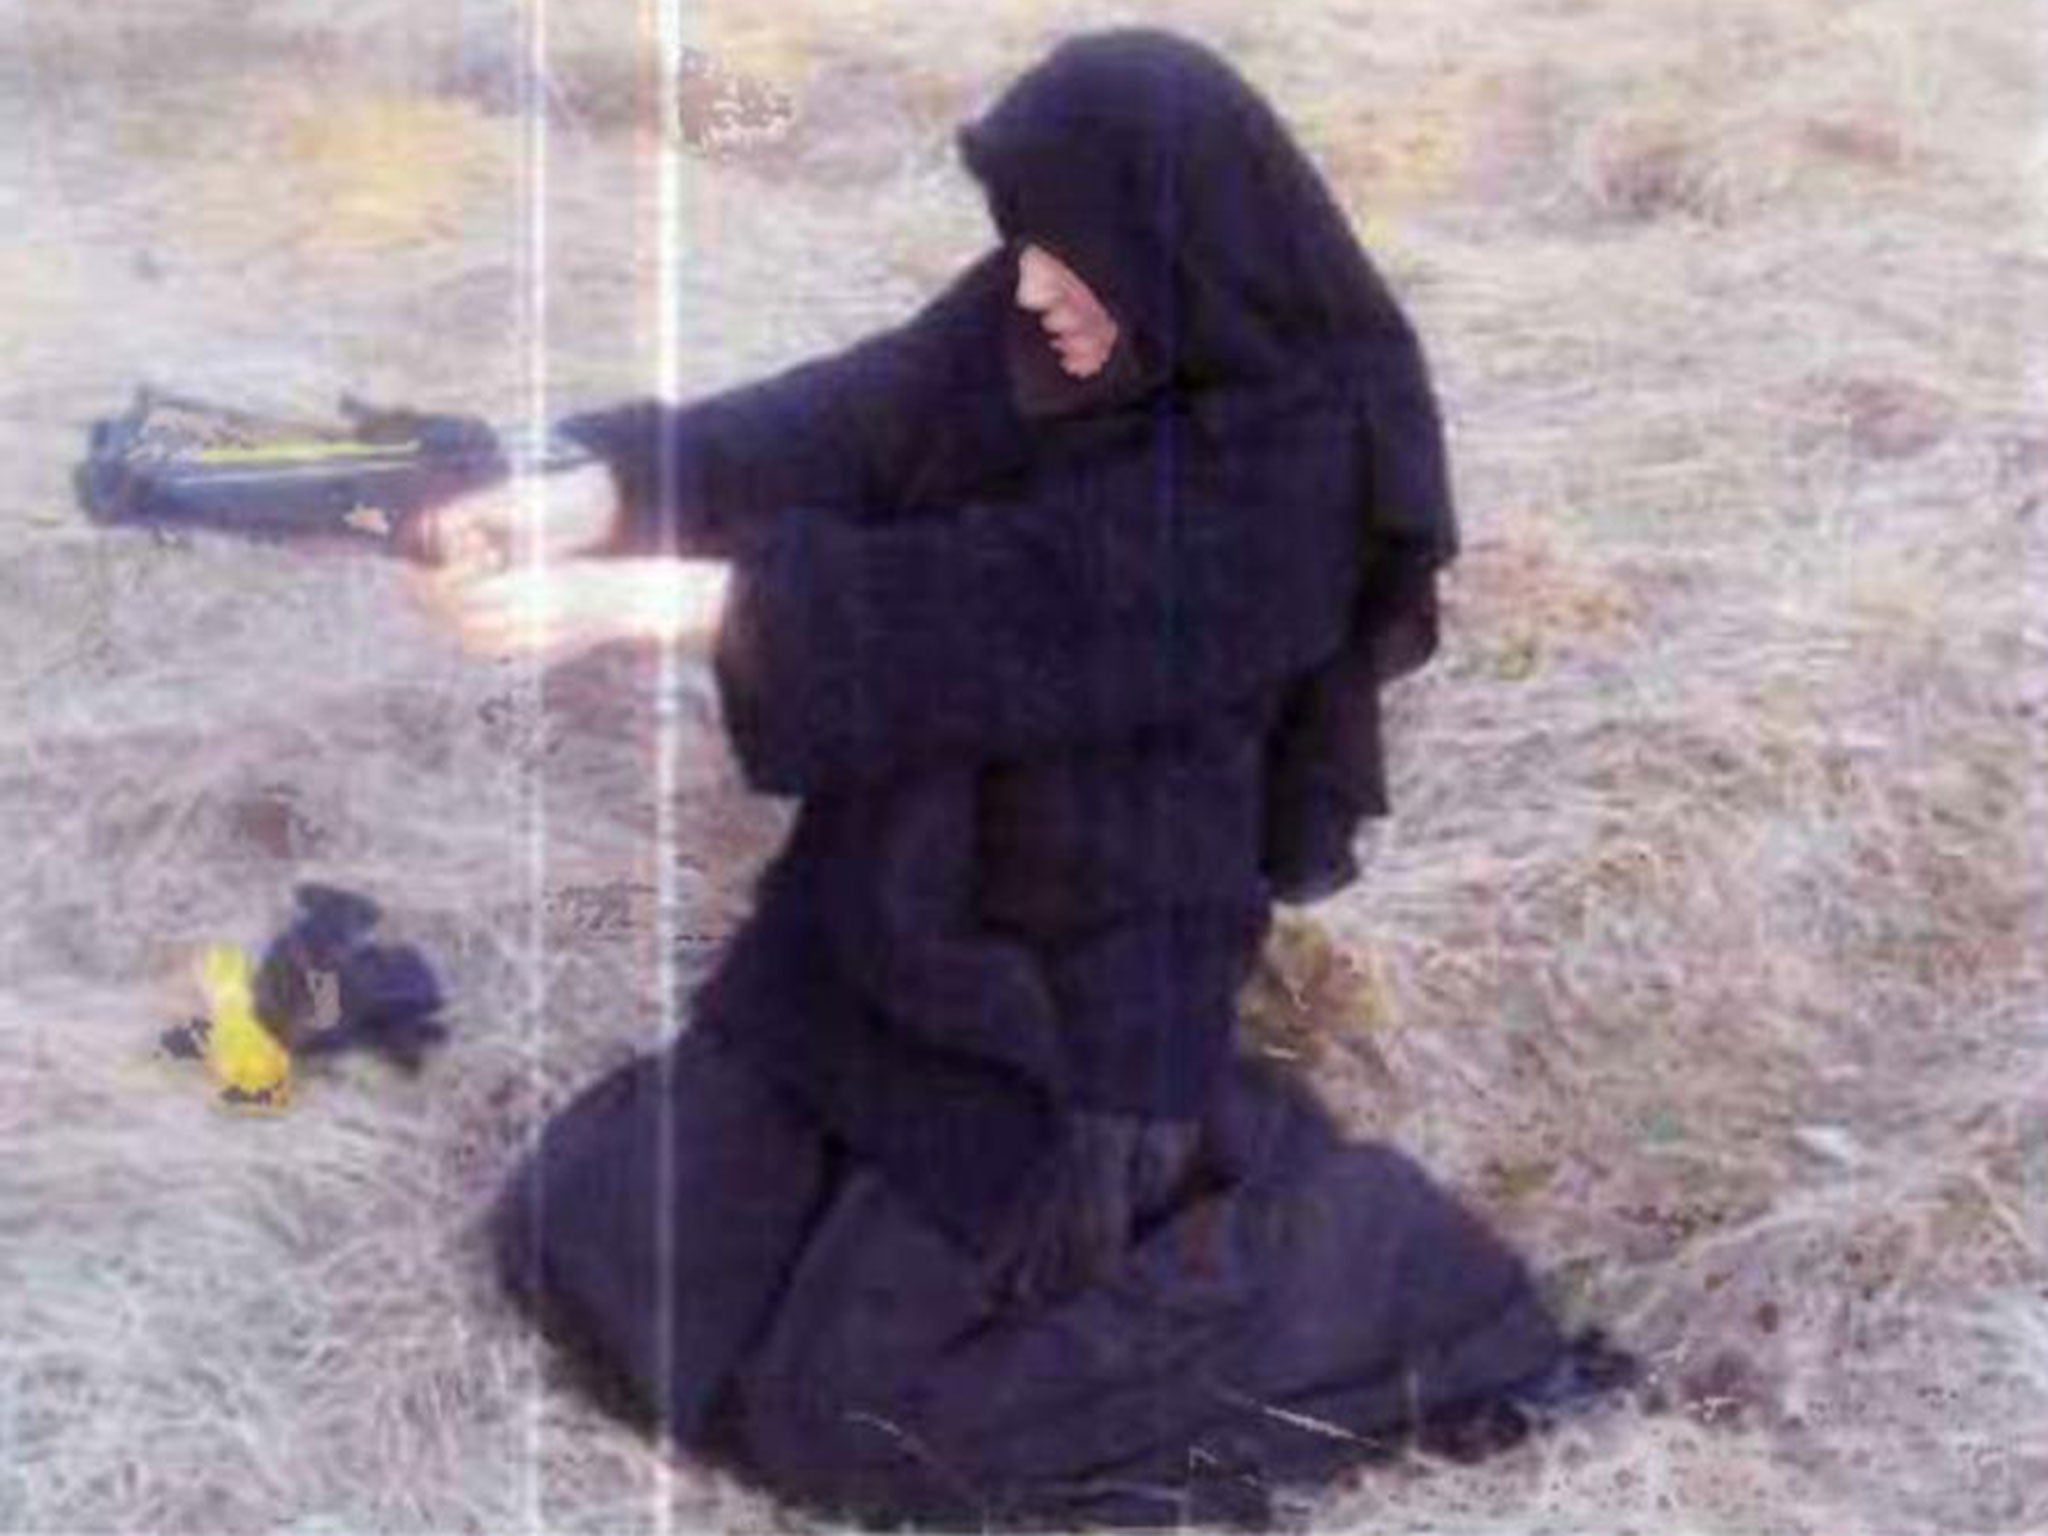 Hayat Boumeddiene in 2010 while she claimed to have crossbow training with husband Amedy Coulibaly